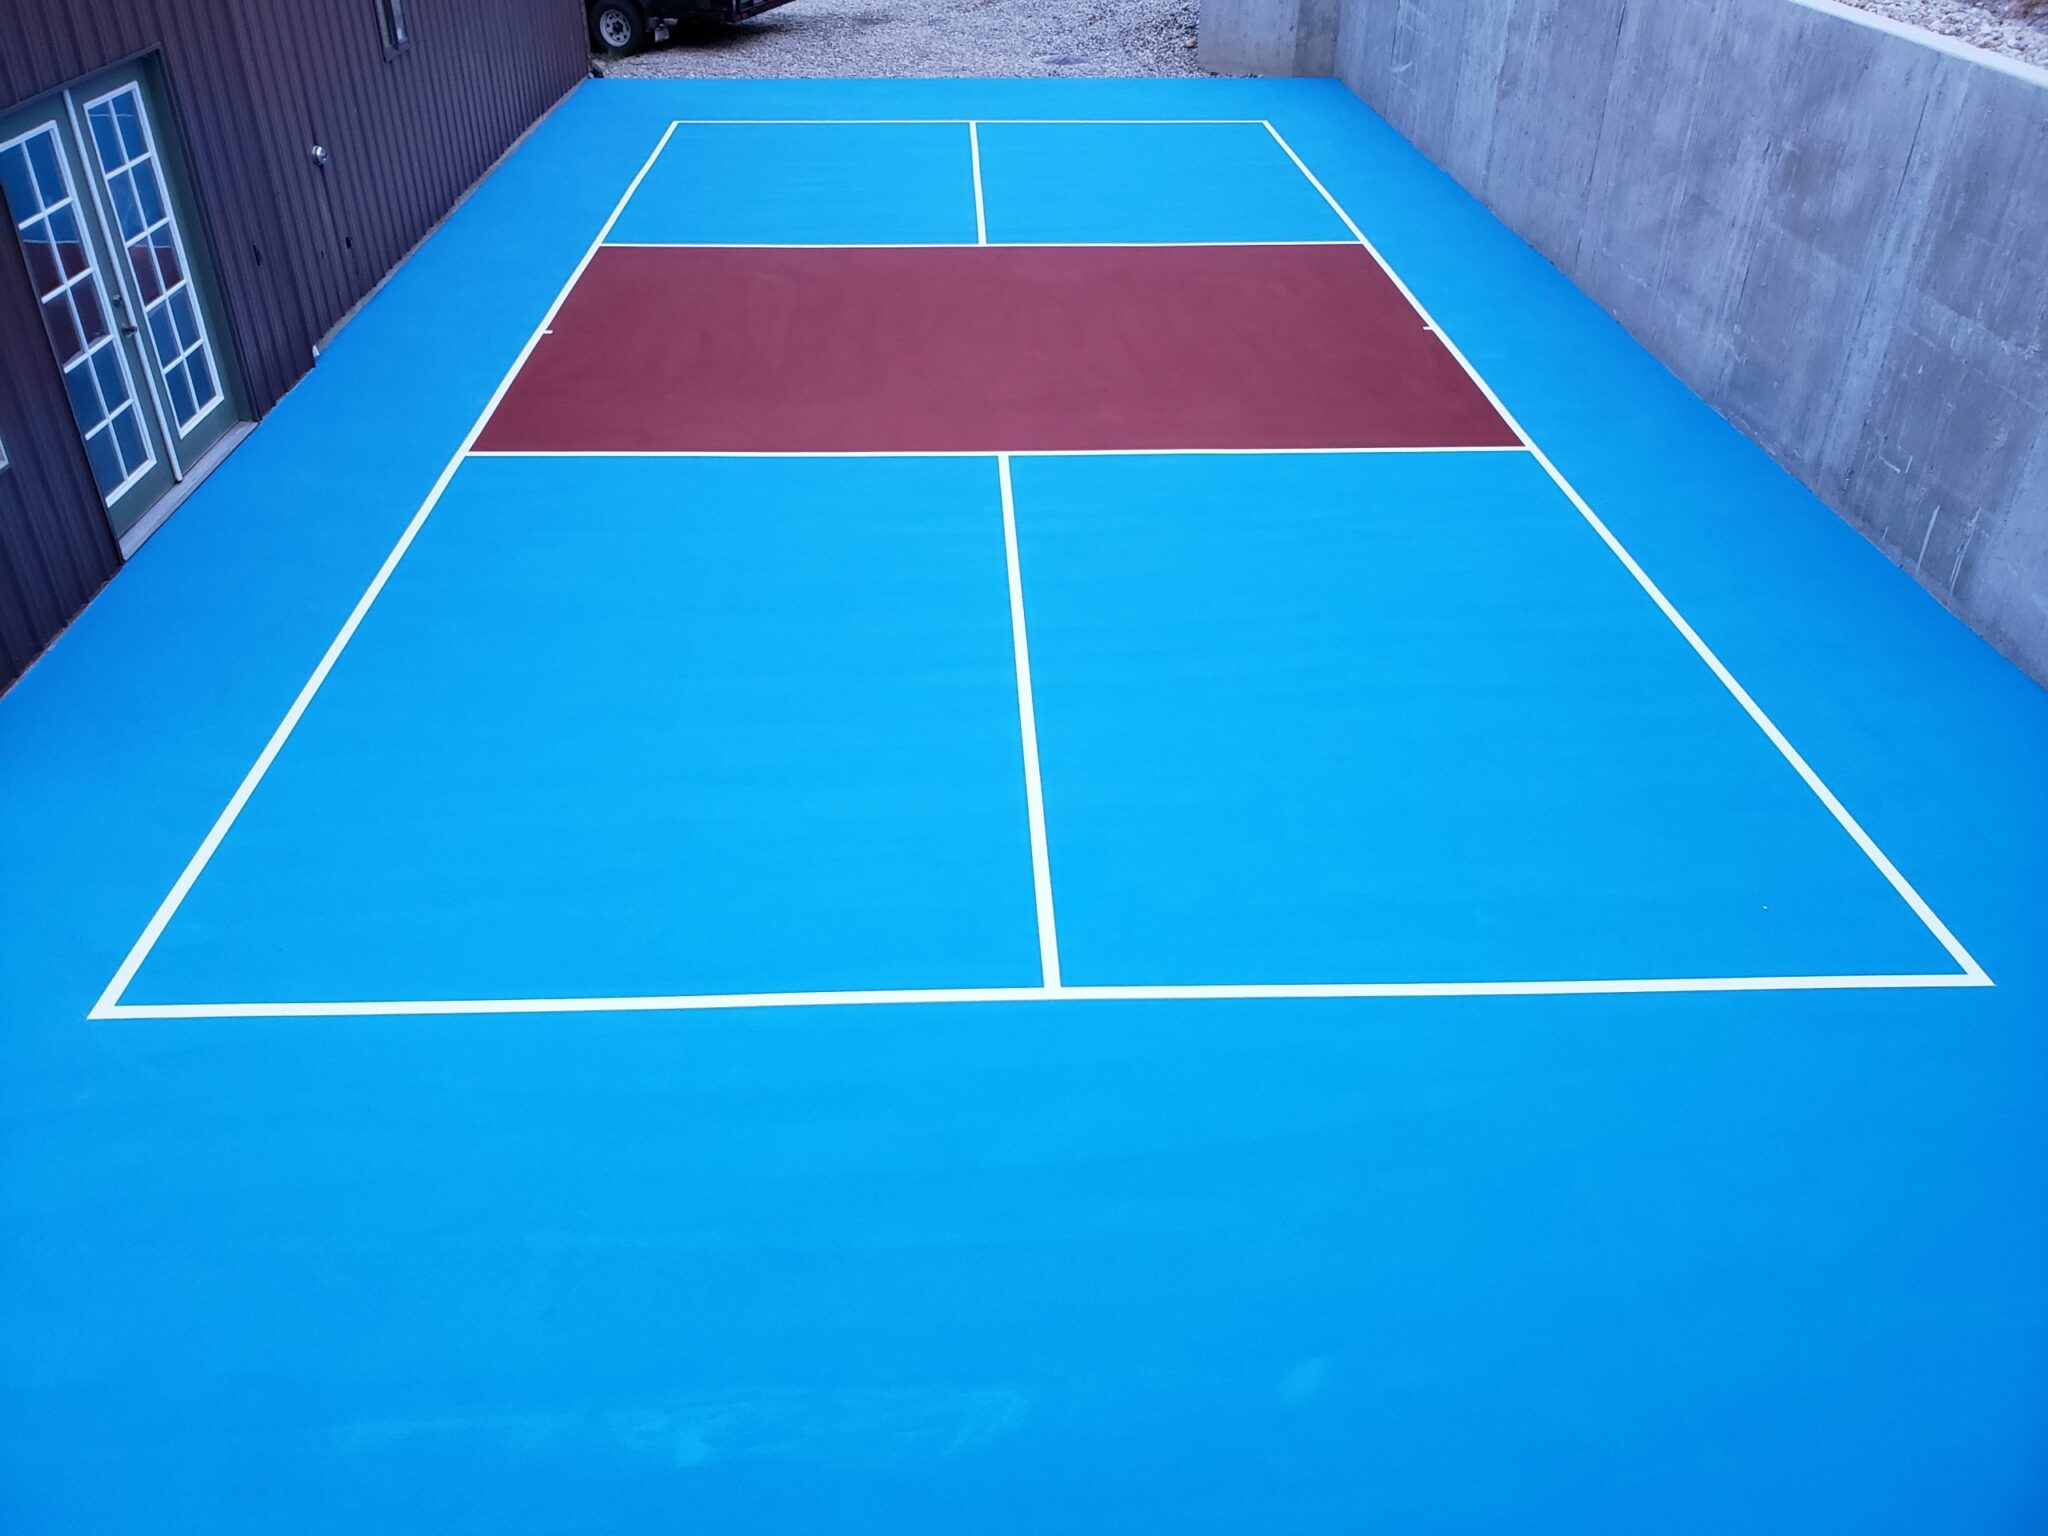 A new pickleball court with blue, maroon, and white colors.